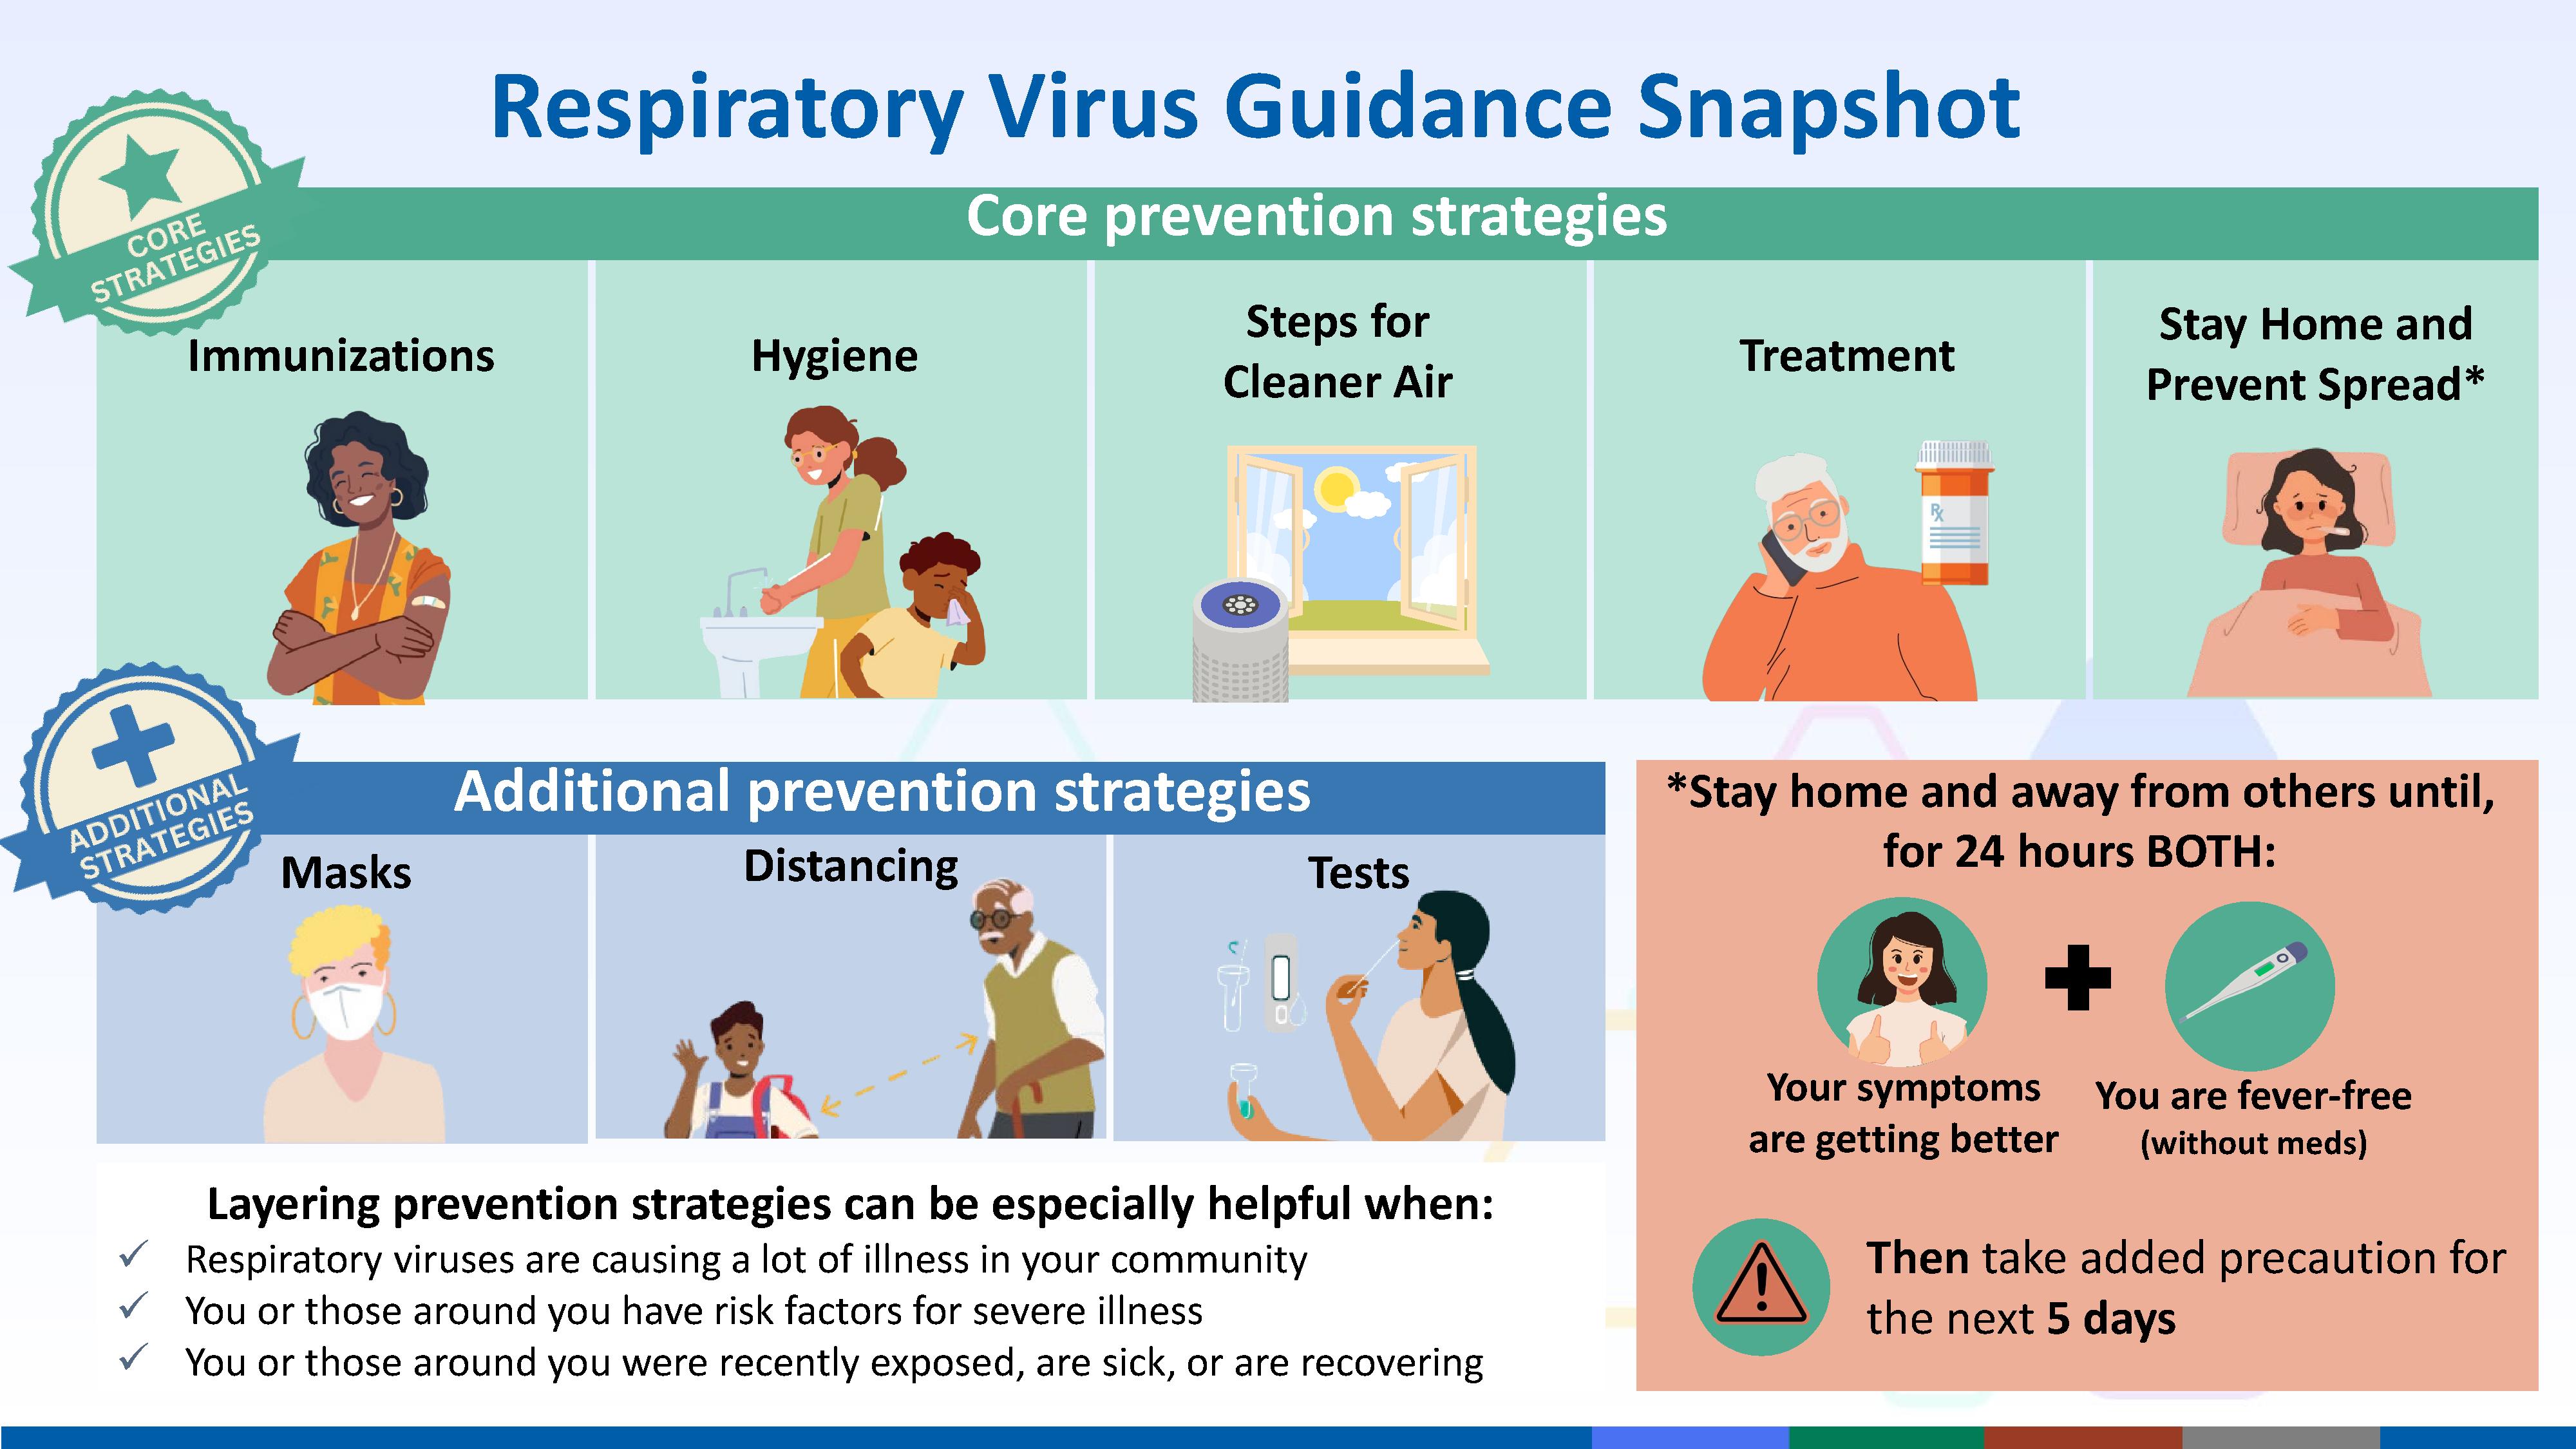 Respiratory Virus Guidance Information - Core prevention strategies  Immunizations Steps for  Cleaner Air Hygiene Treatment  Layering prevention strategies can be especially helpful when:     Respiratory viruses are causing a lot of illness in your community  You or those around you have risk factors for severe illness  You or those around you were recently exposed, are sick, or are recovering  *Stay home and away from others until,  for 24 hours BOTH:  Your symptoms  are getting better  You are fever-free  (without meds)  Then take added precaution for  the next 5 days